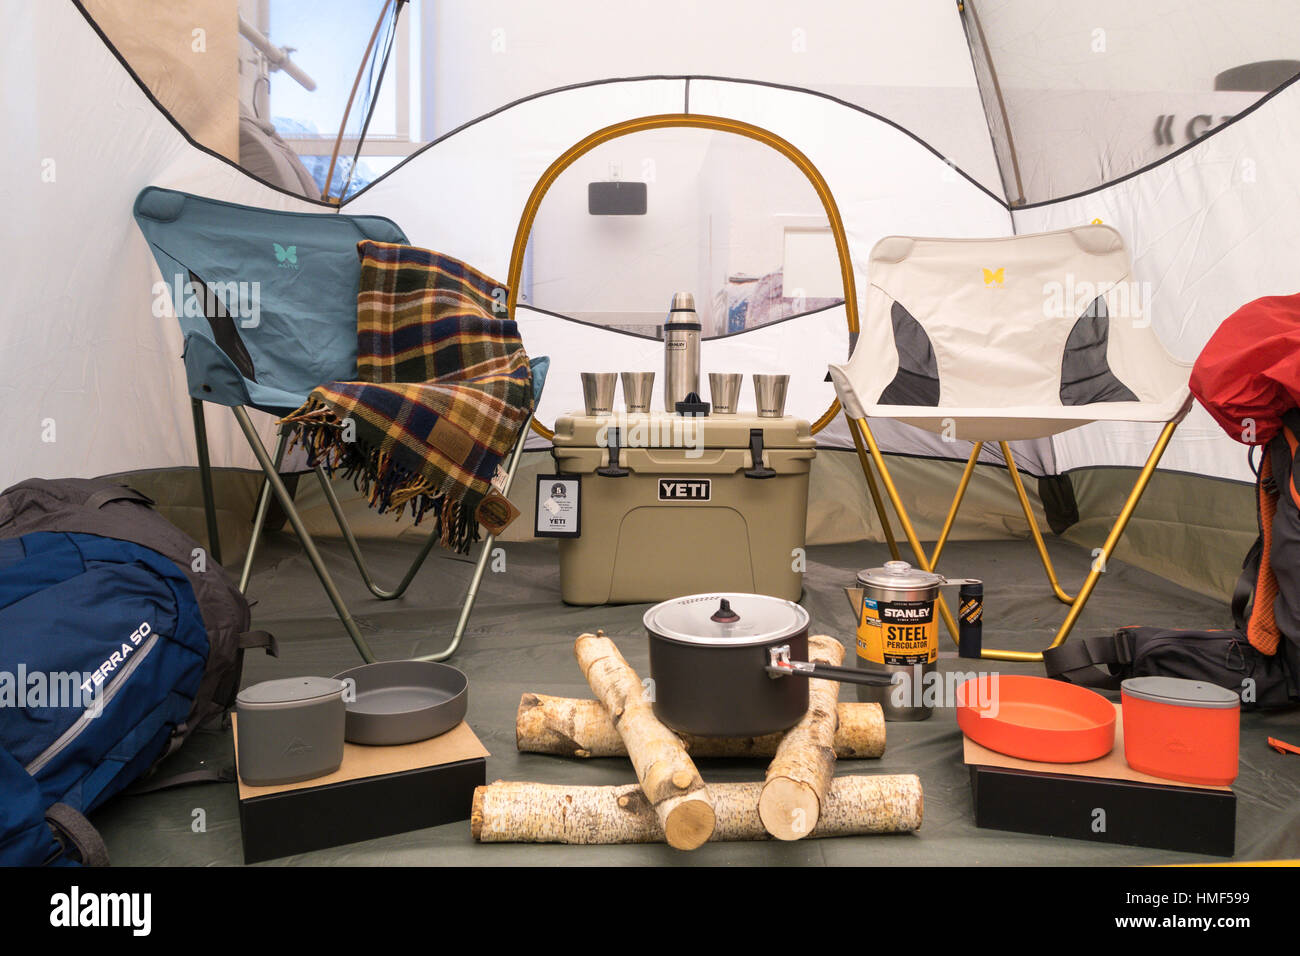 Camping Equipment Store High Resolution Stock Photography and Images - Alamy